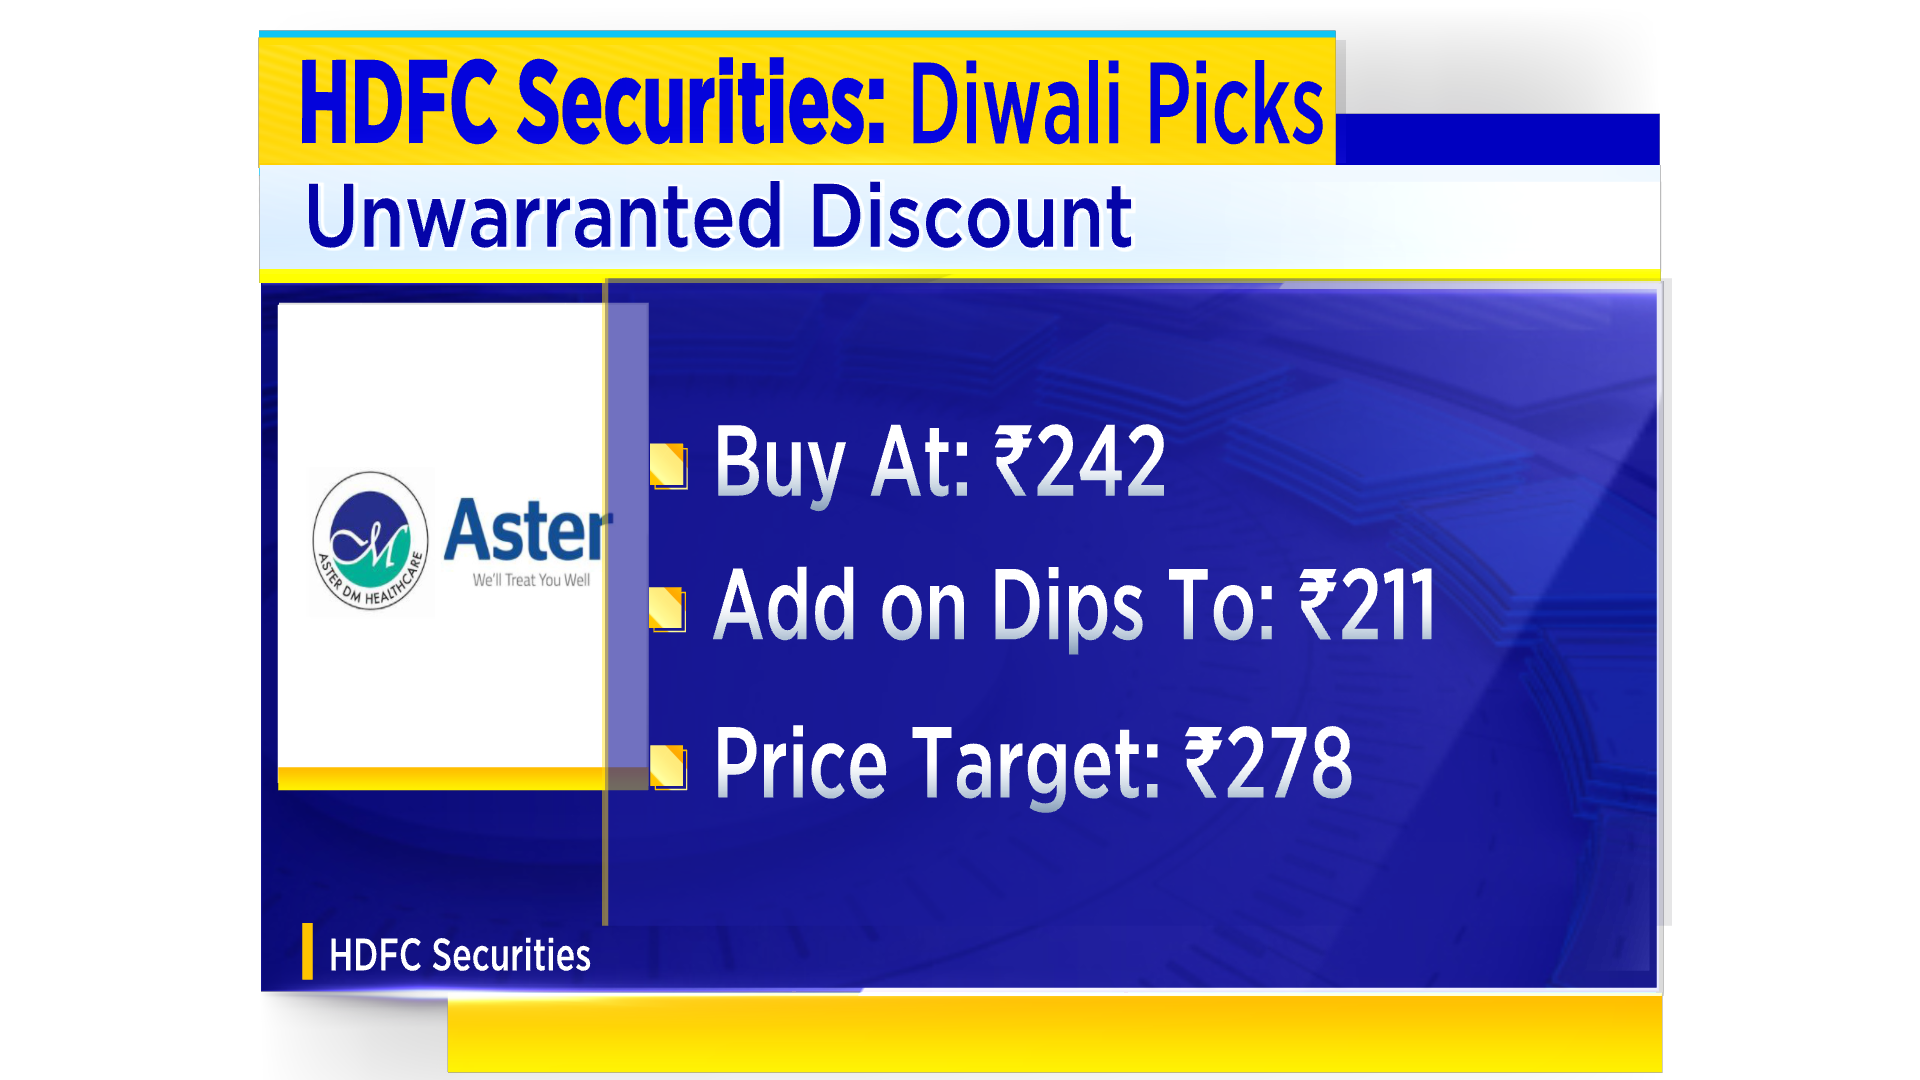 Samvat 2079 The 10 Stocks For The New Year From Hdfc Securities 9740